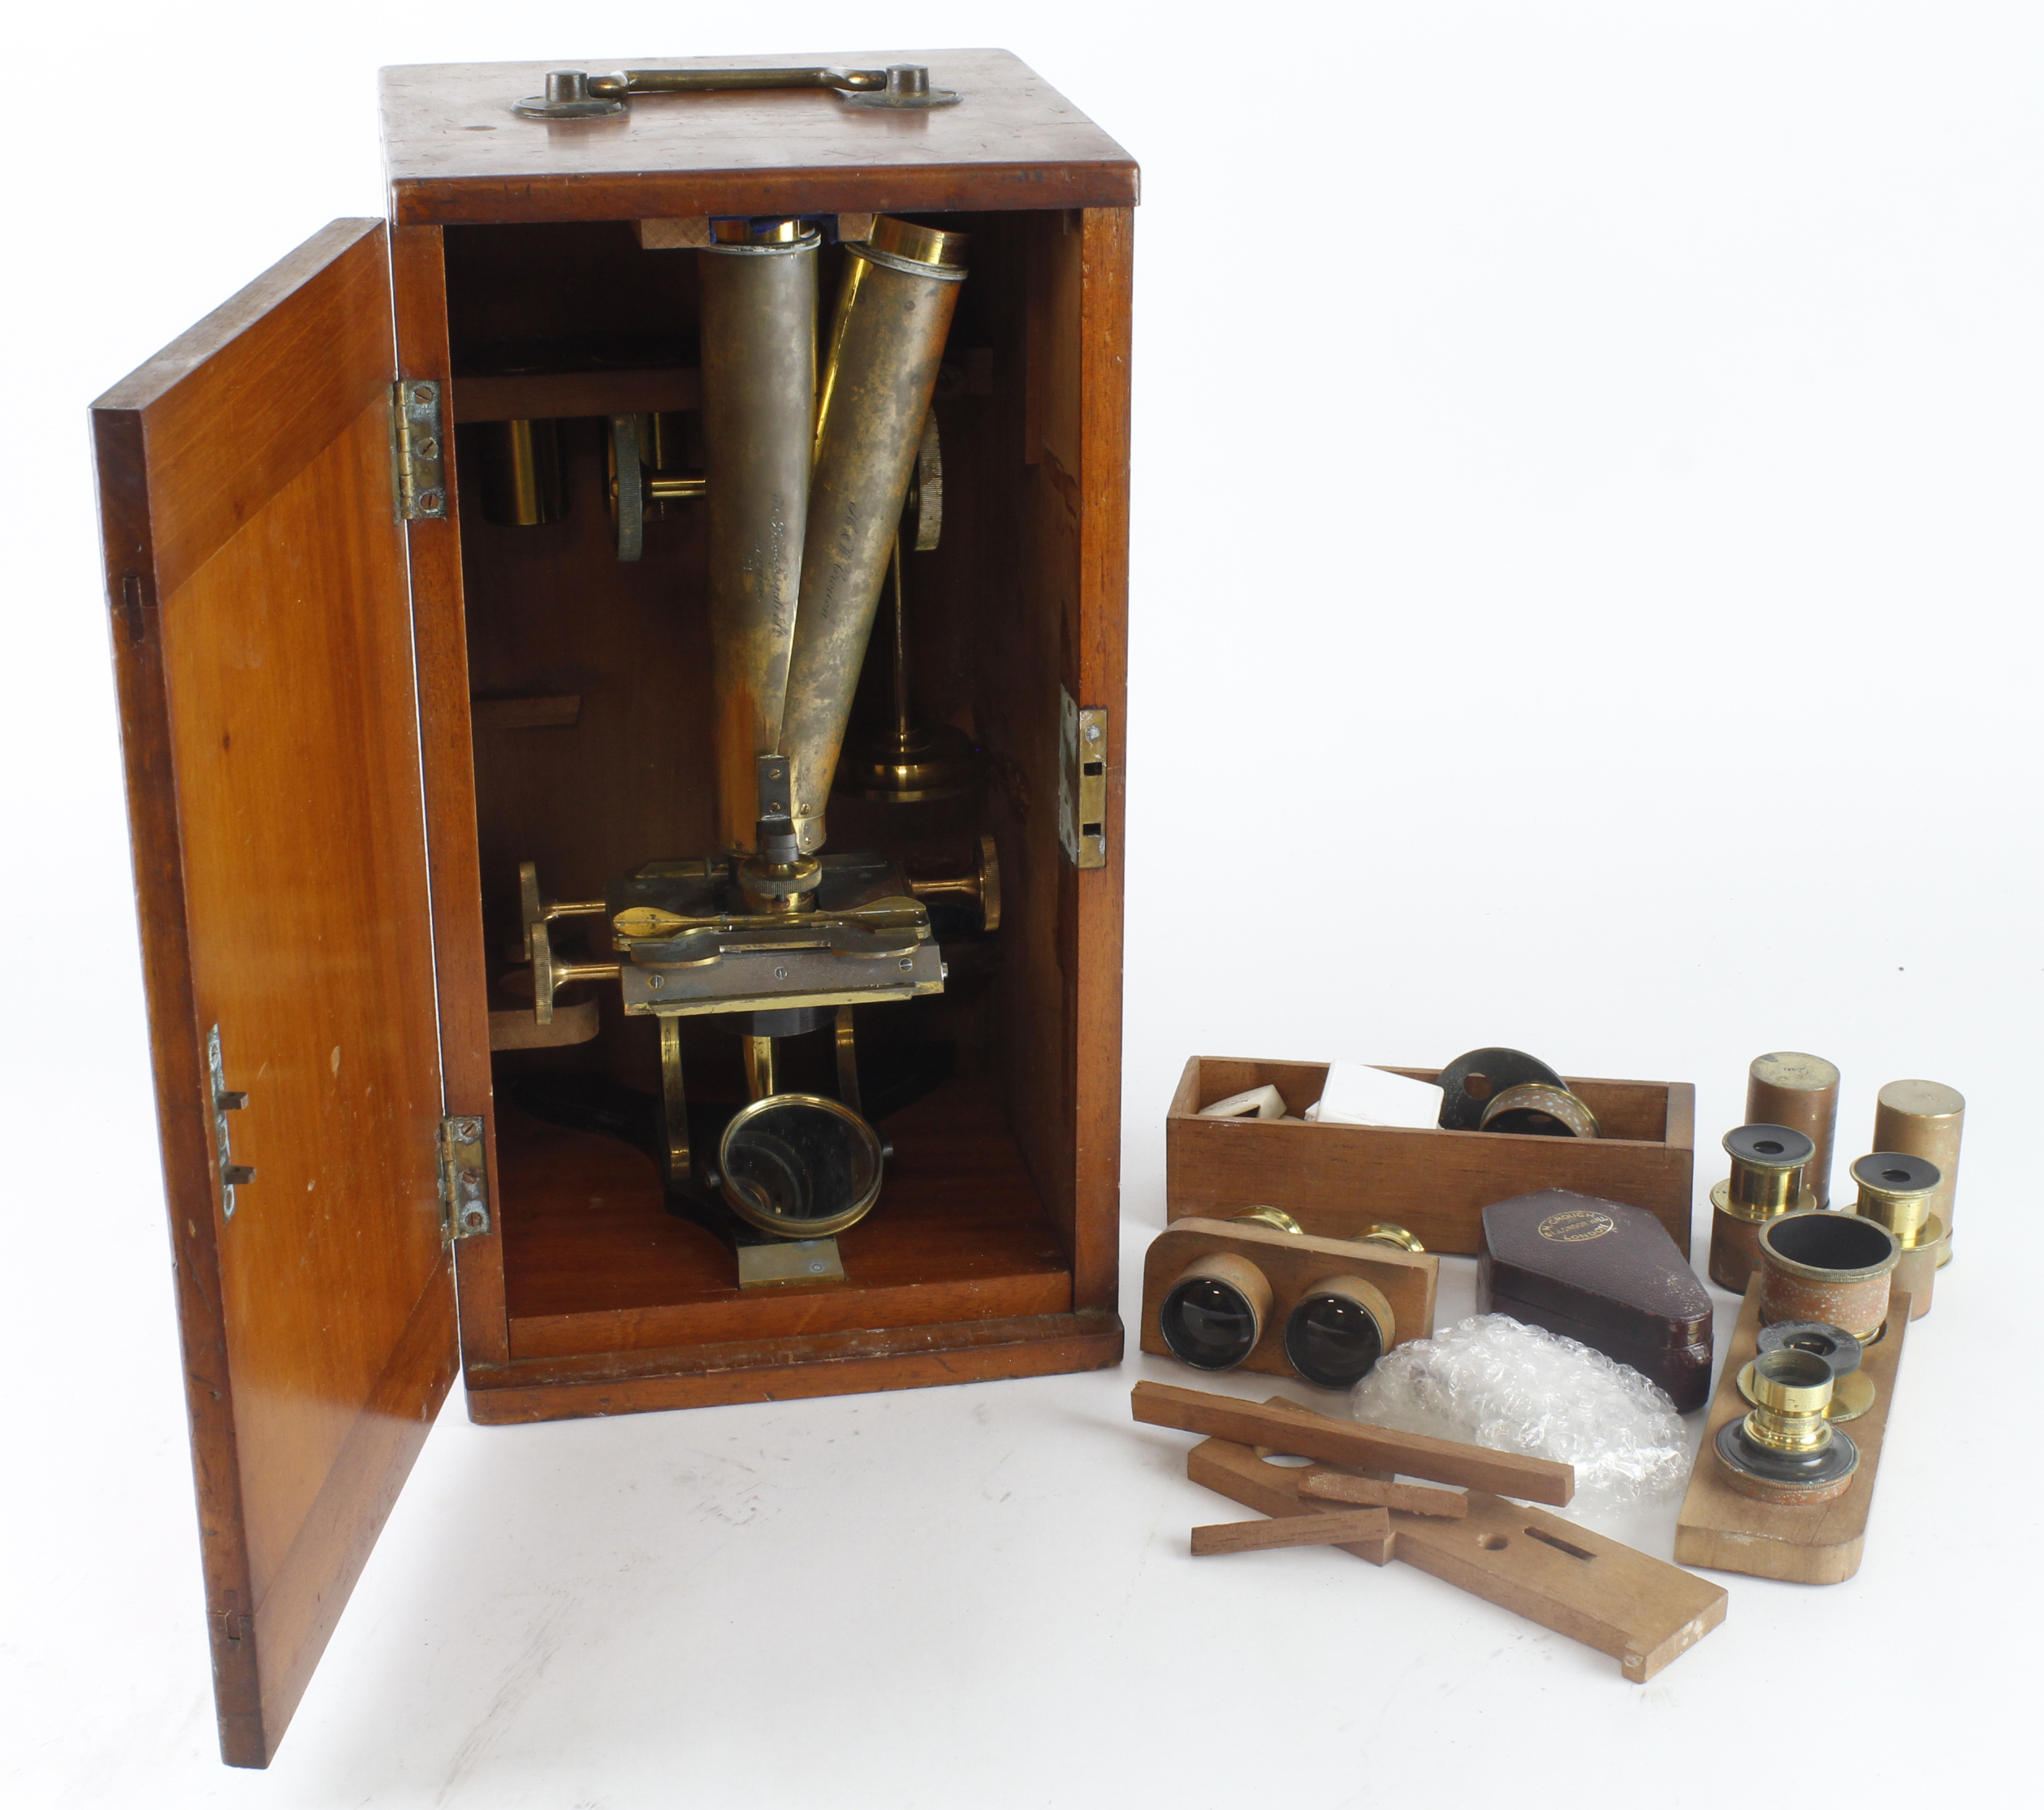 Victorian microscope by H & W Crouch (61 Bishops Gate St., London, no. 171), with a group of